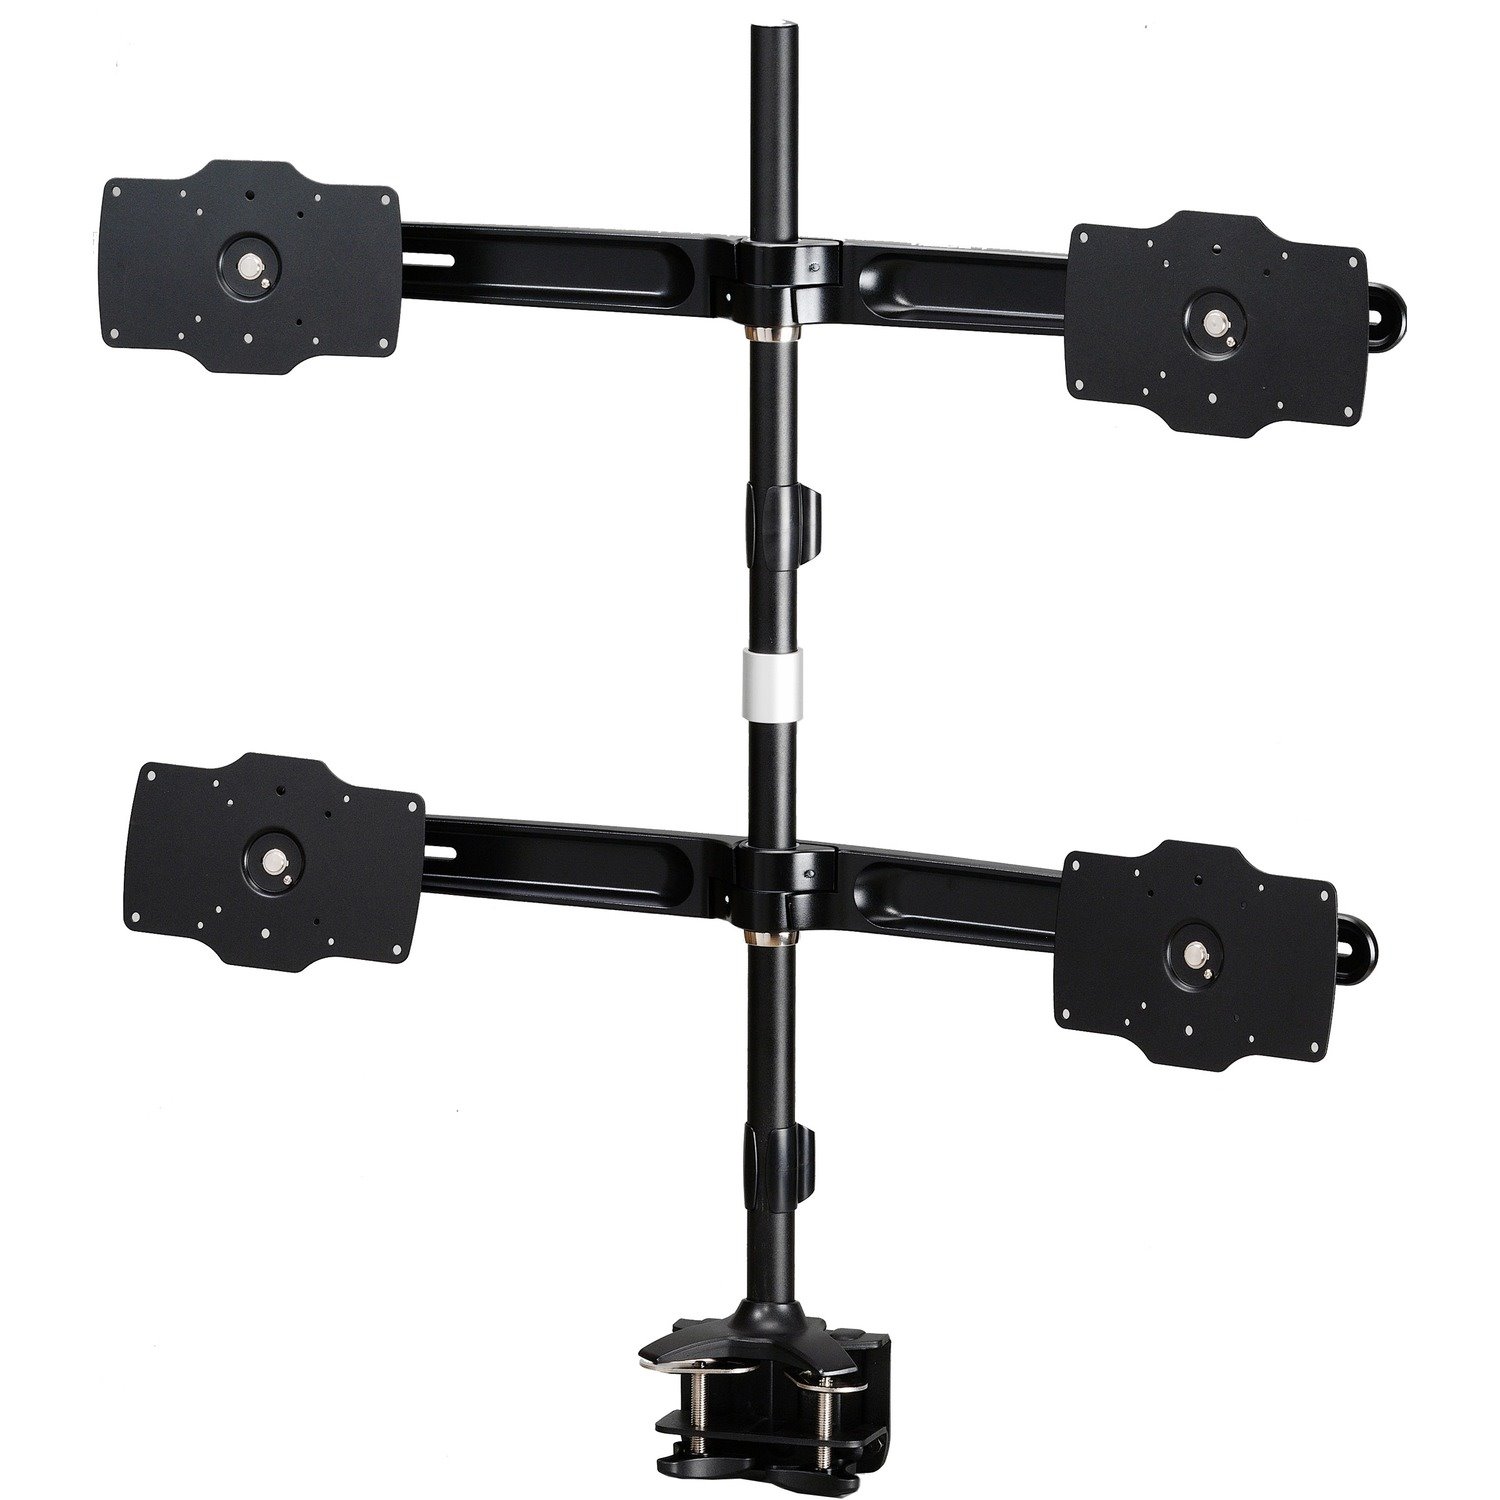 Amer Mounts Clamp Based Quad Monitor Mount for four 24"-32" LCD/LED Flat Panel Screens